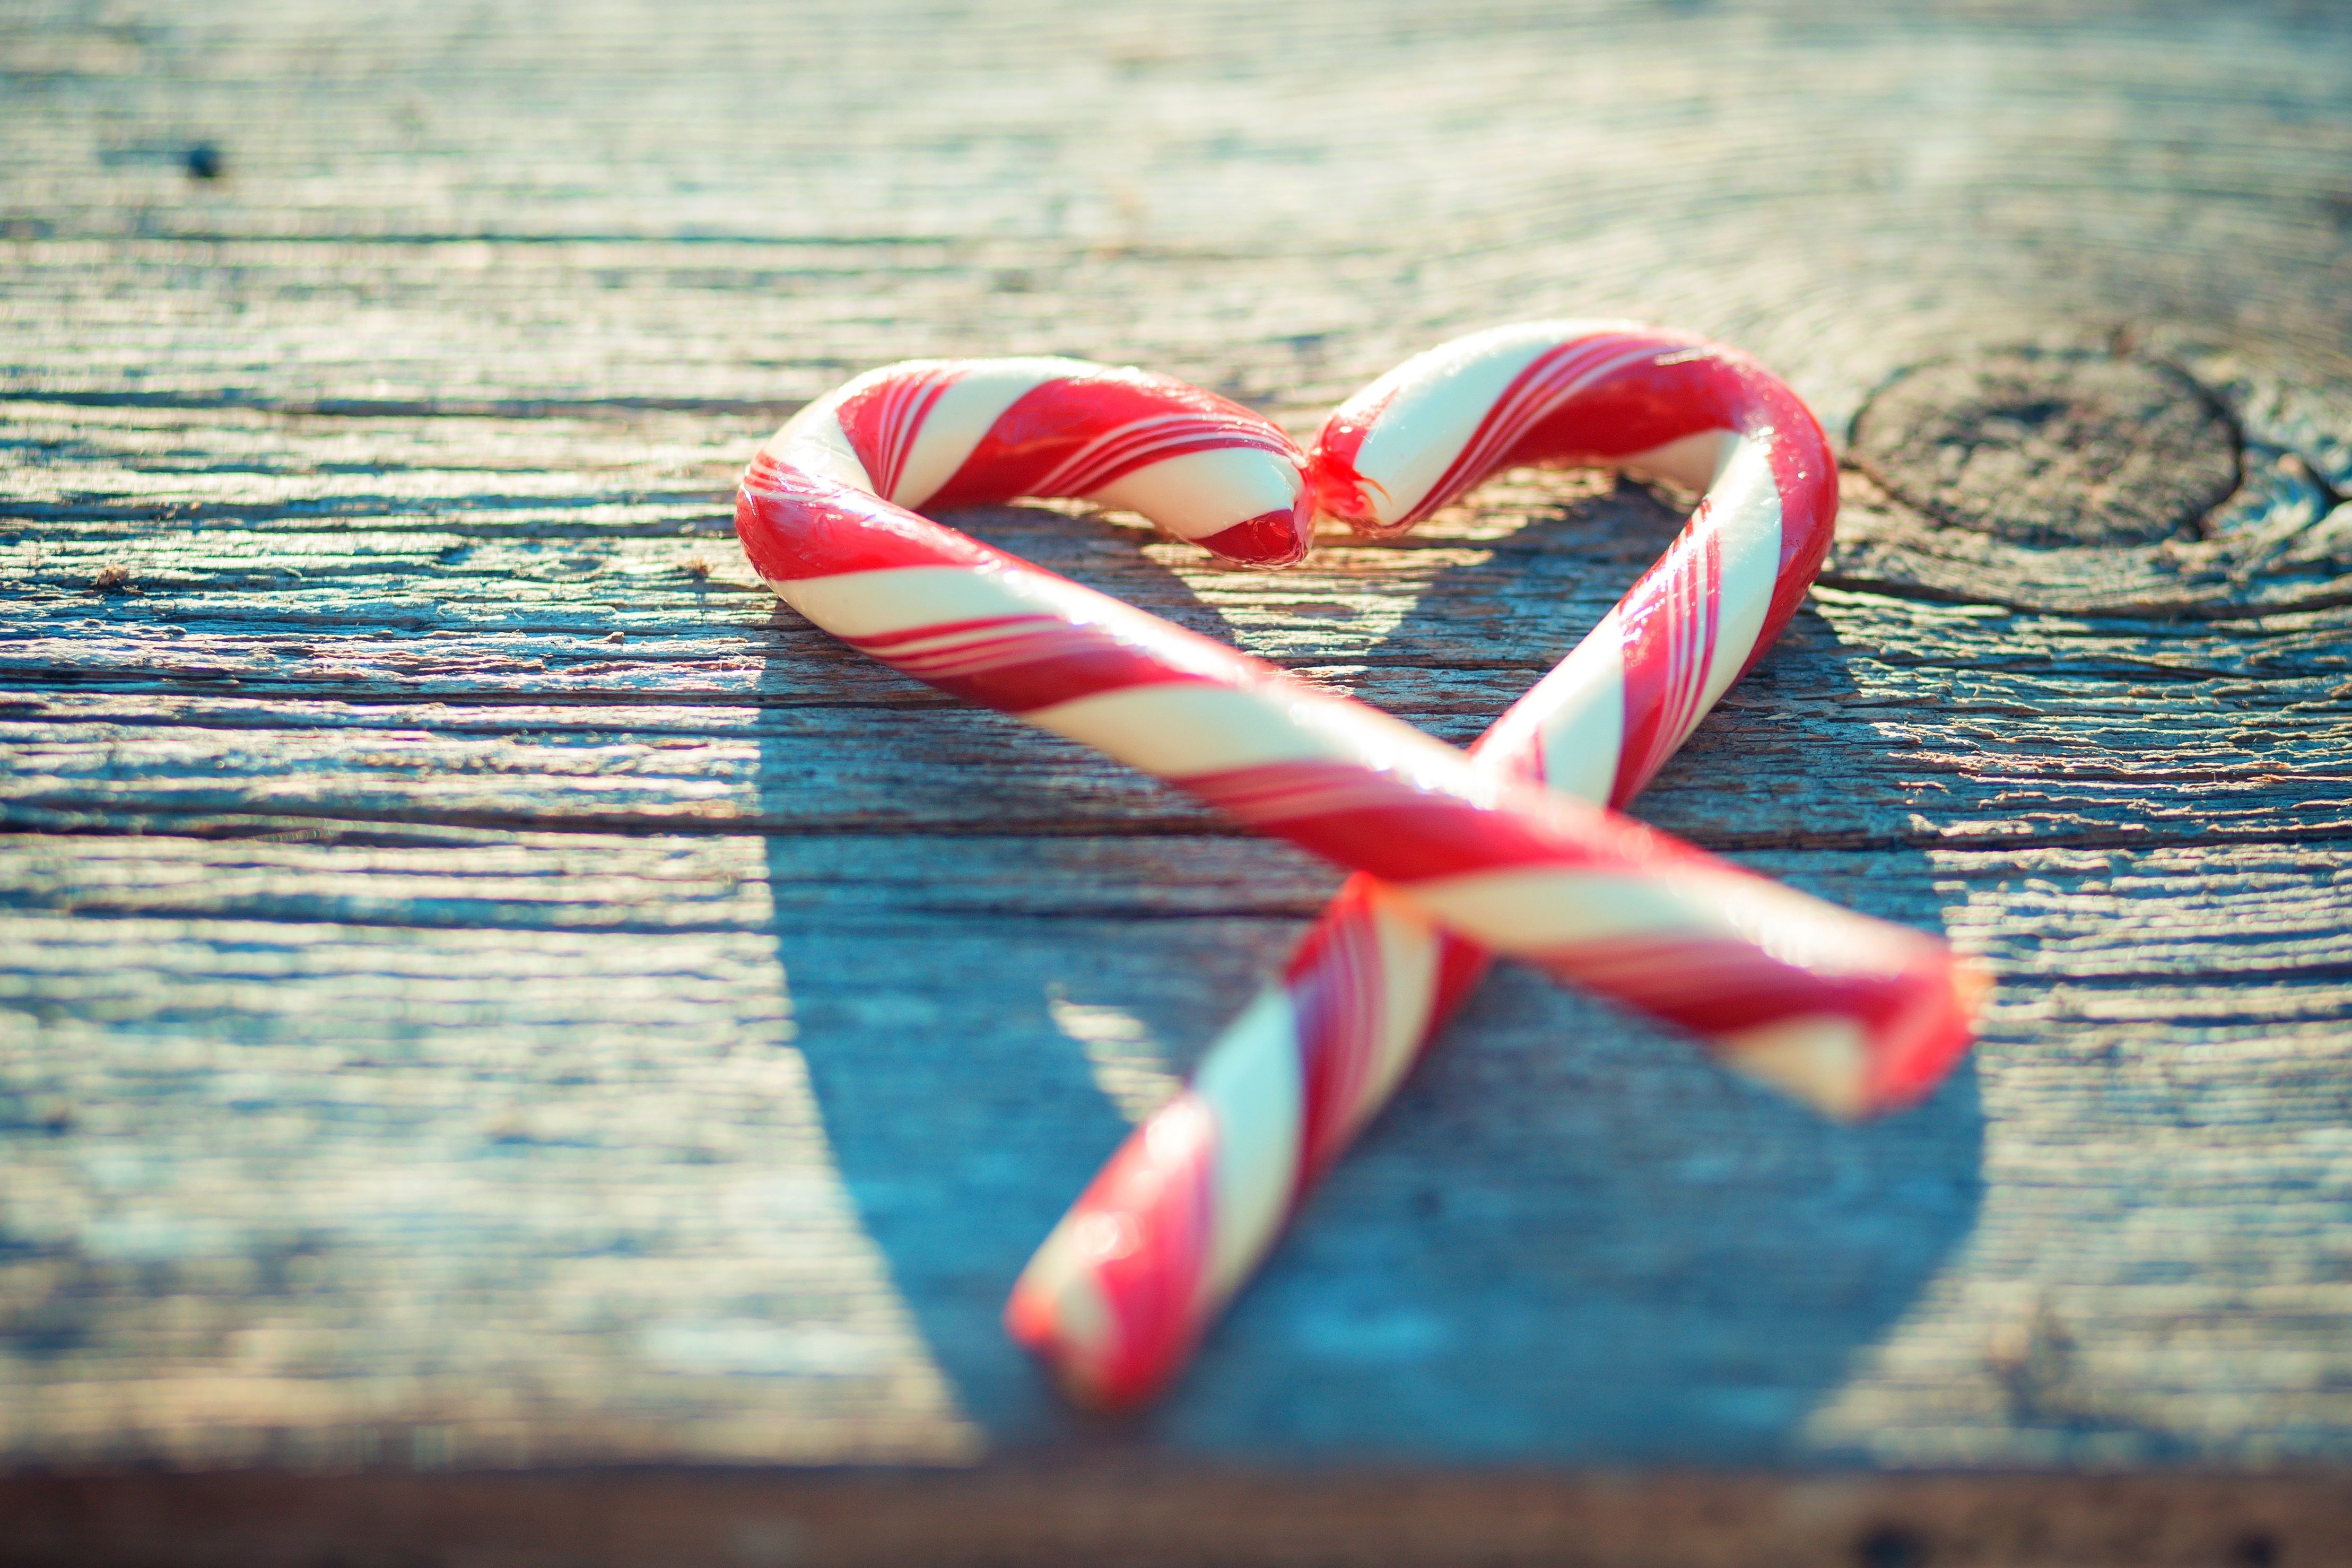 Two candy canes in the shape of a heart on a wooden table - Candy cane